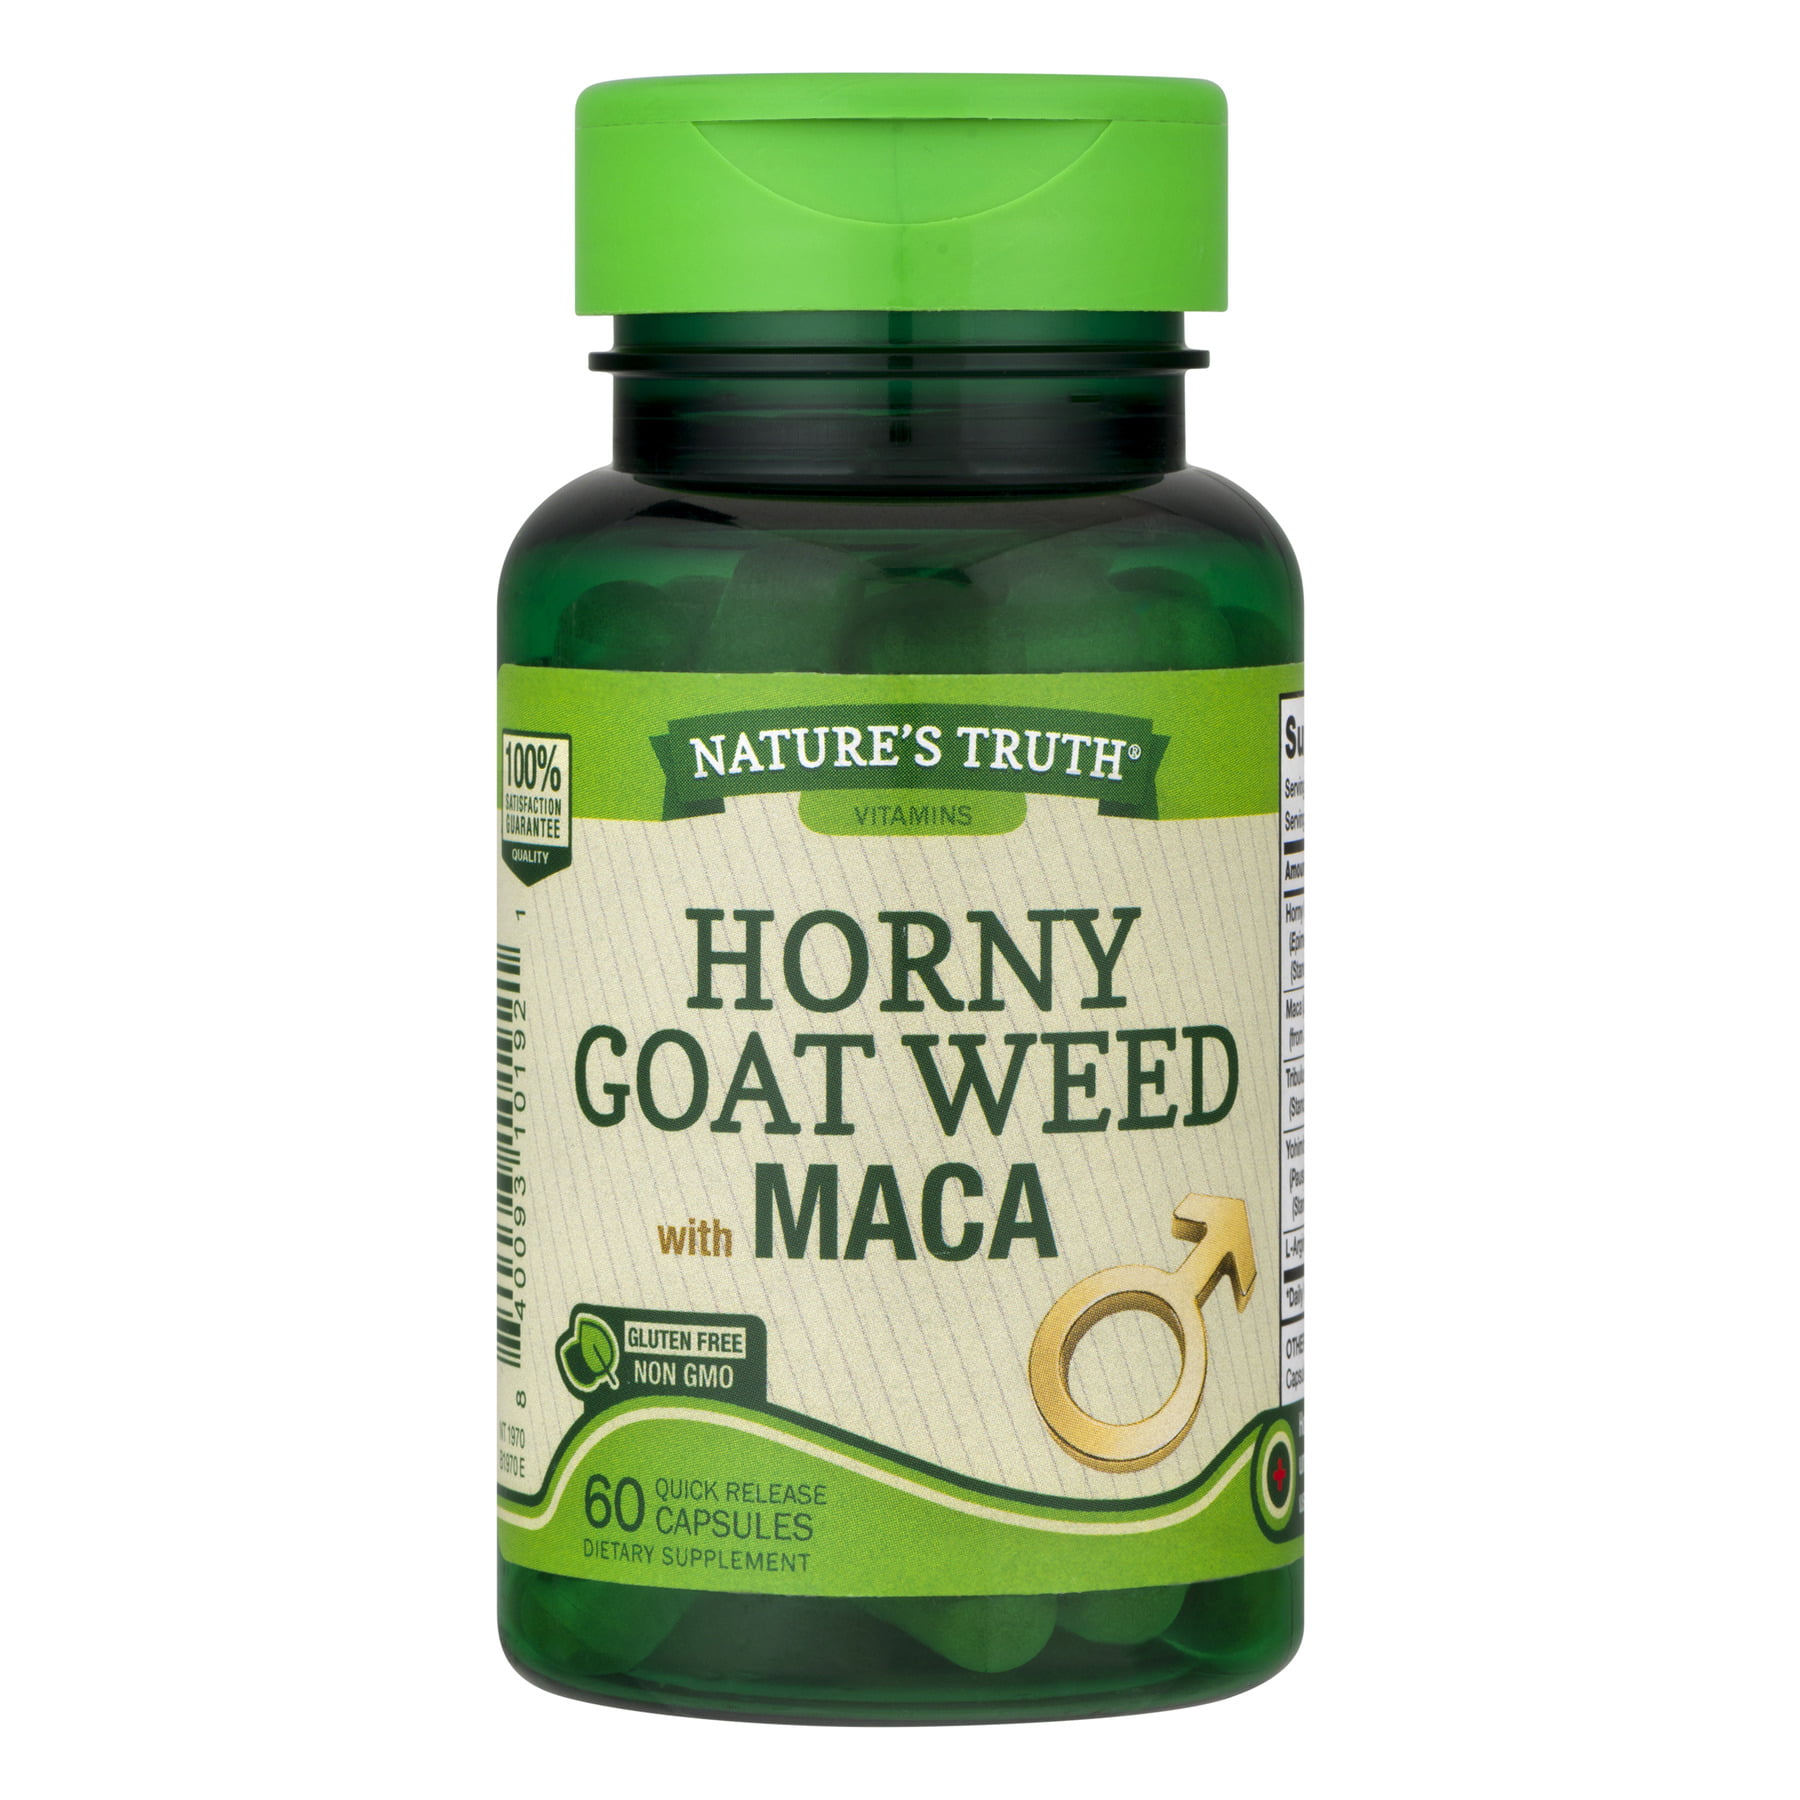 Nature's Truth Horny Goat Weed with MACA Capsules, 60 Count - Walmart....